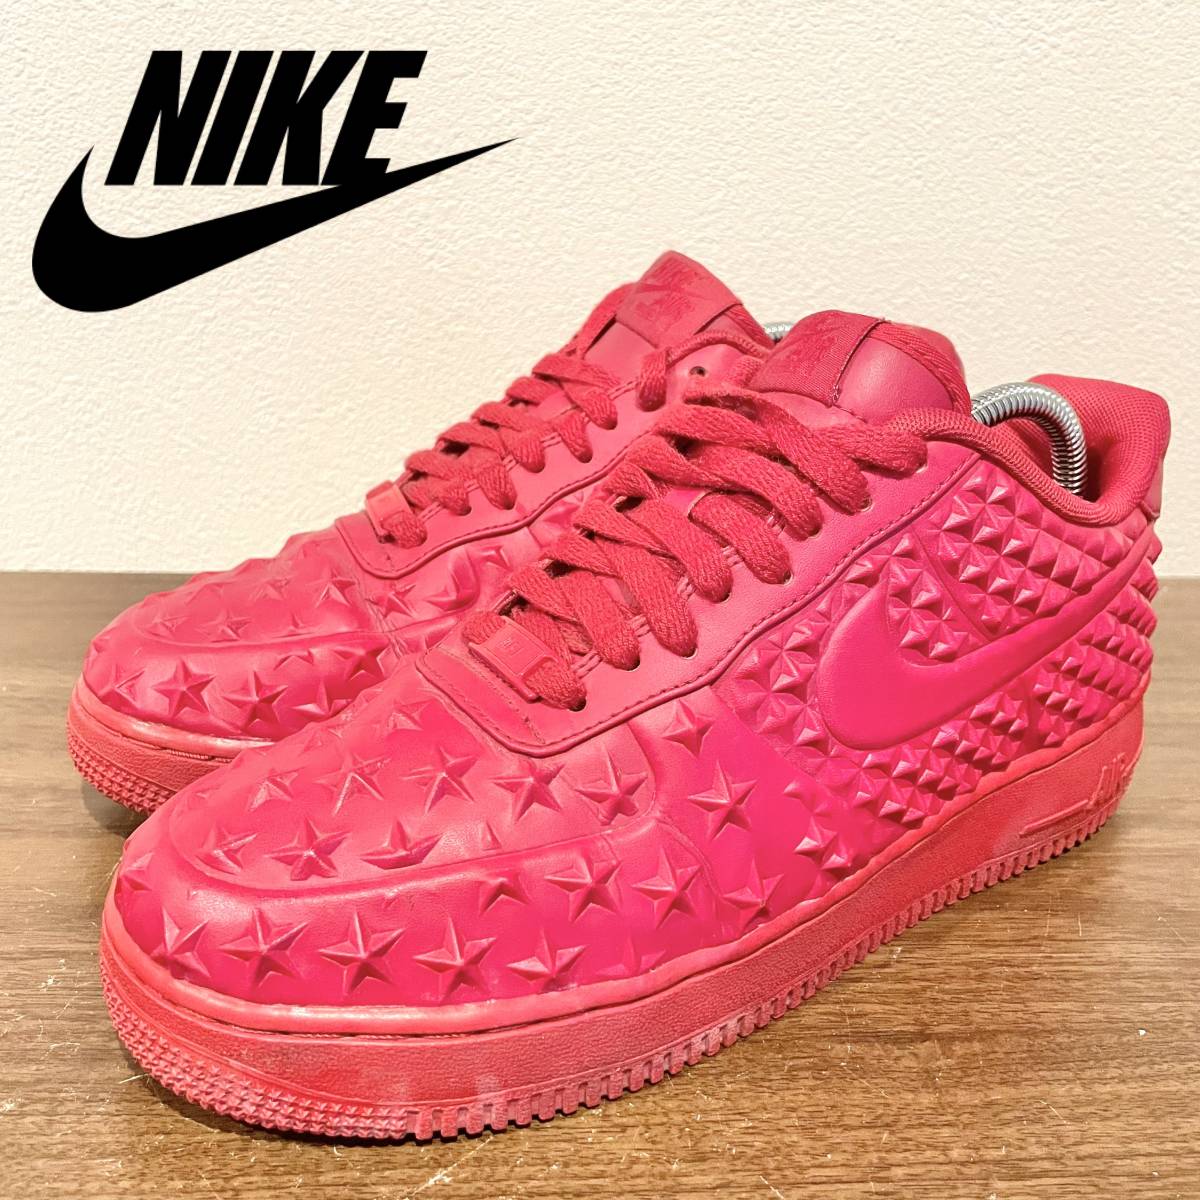 NIKE AIR FORCE 1 LV8 VT INDEPENDENCE DAY ナイキ エア フォース ワン